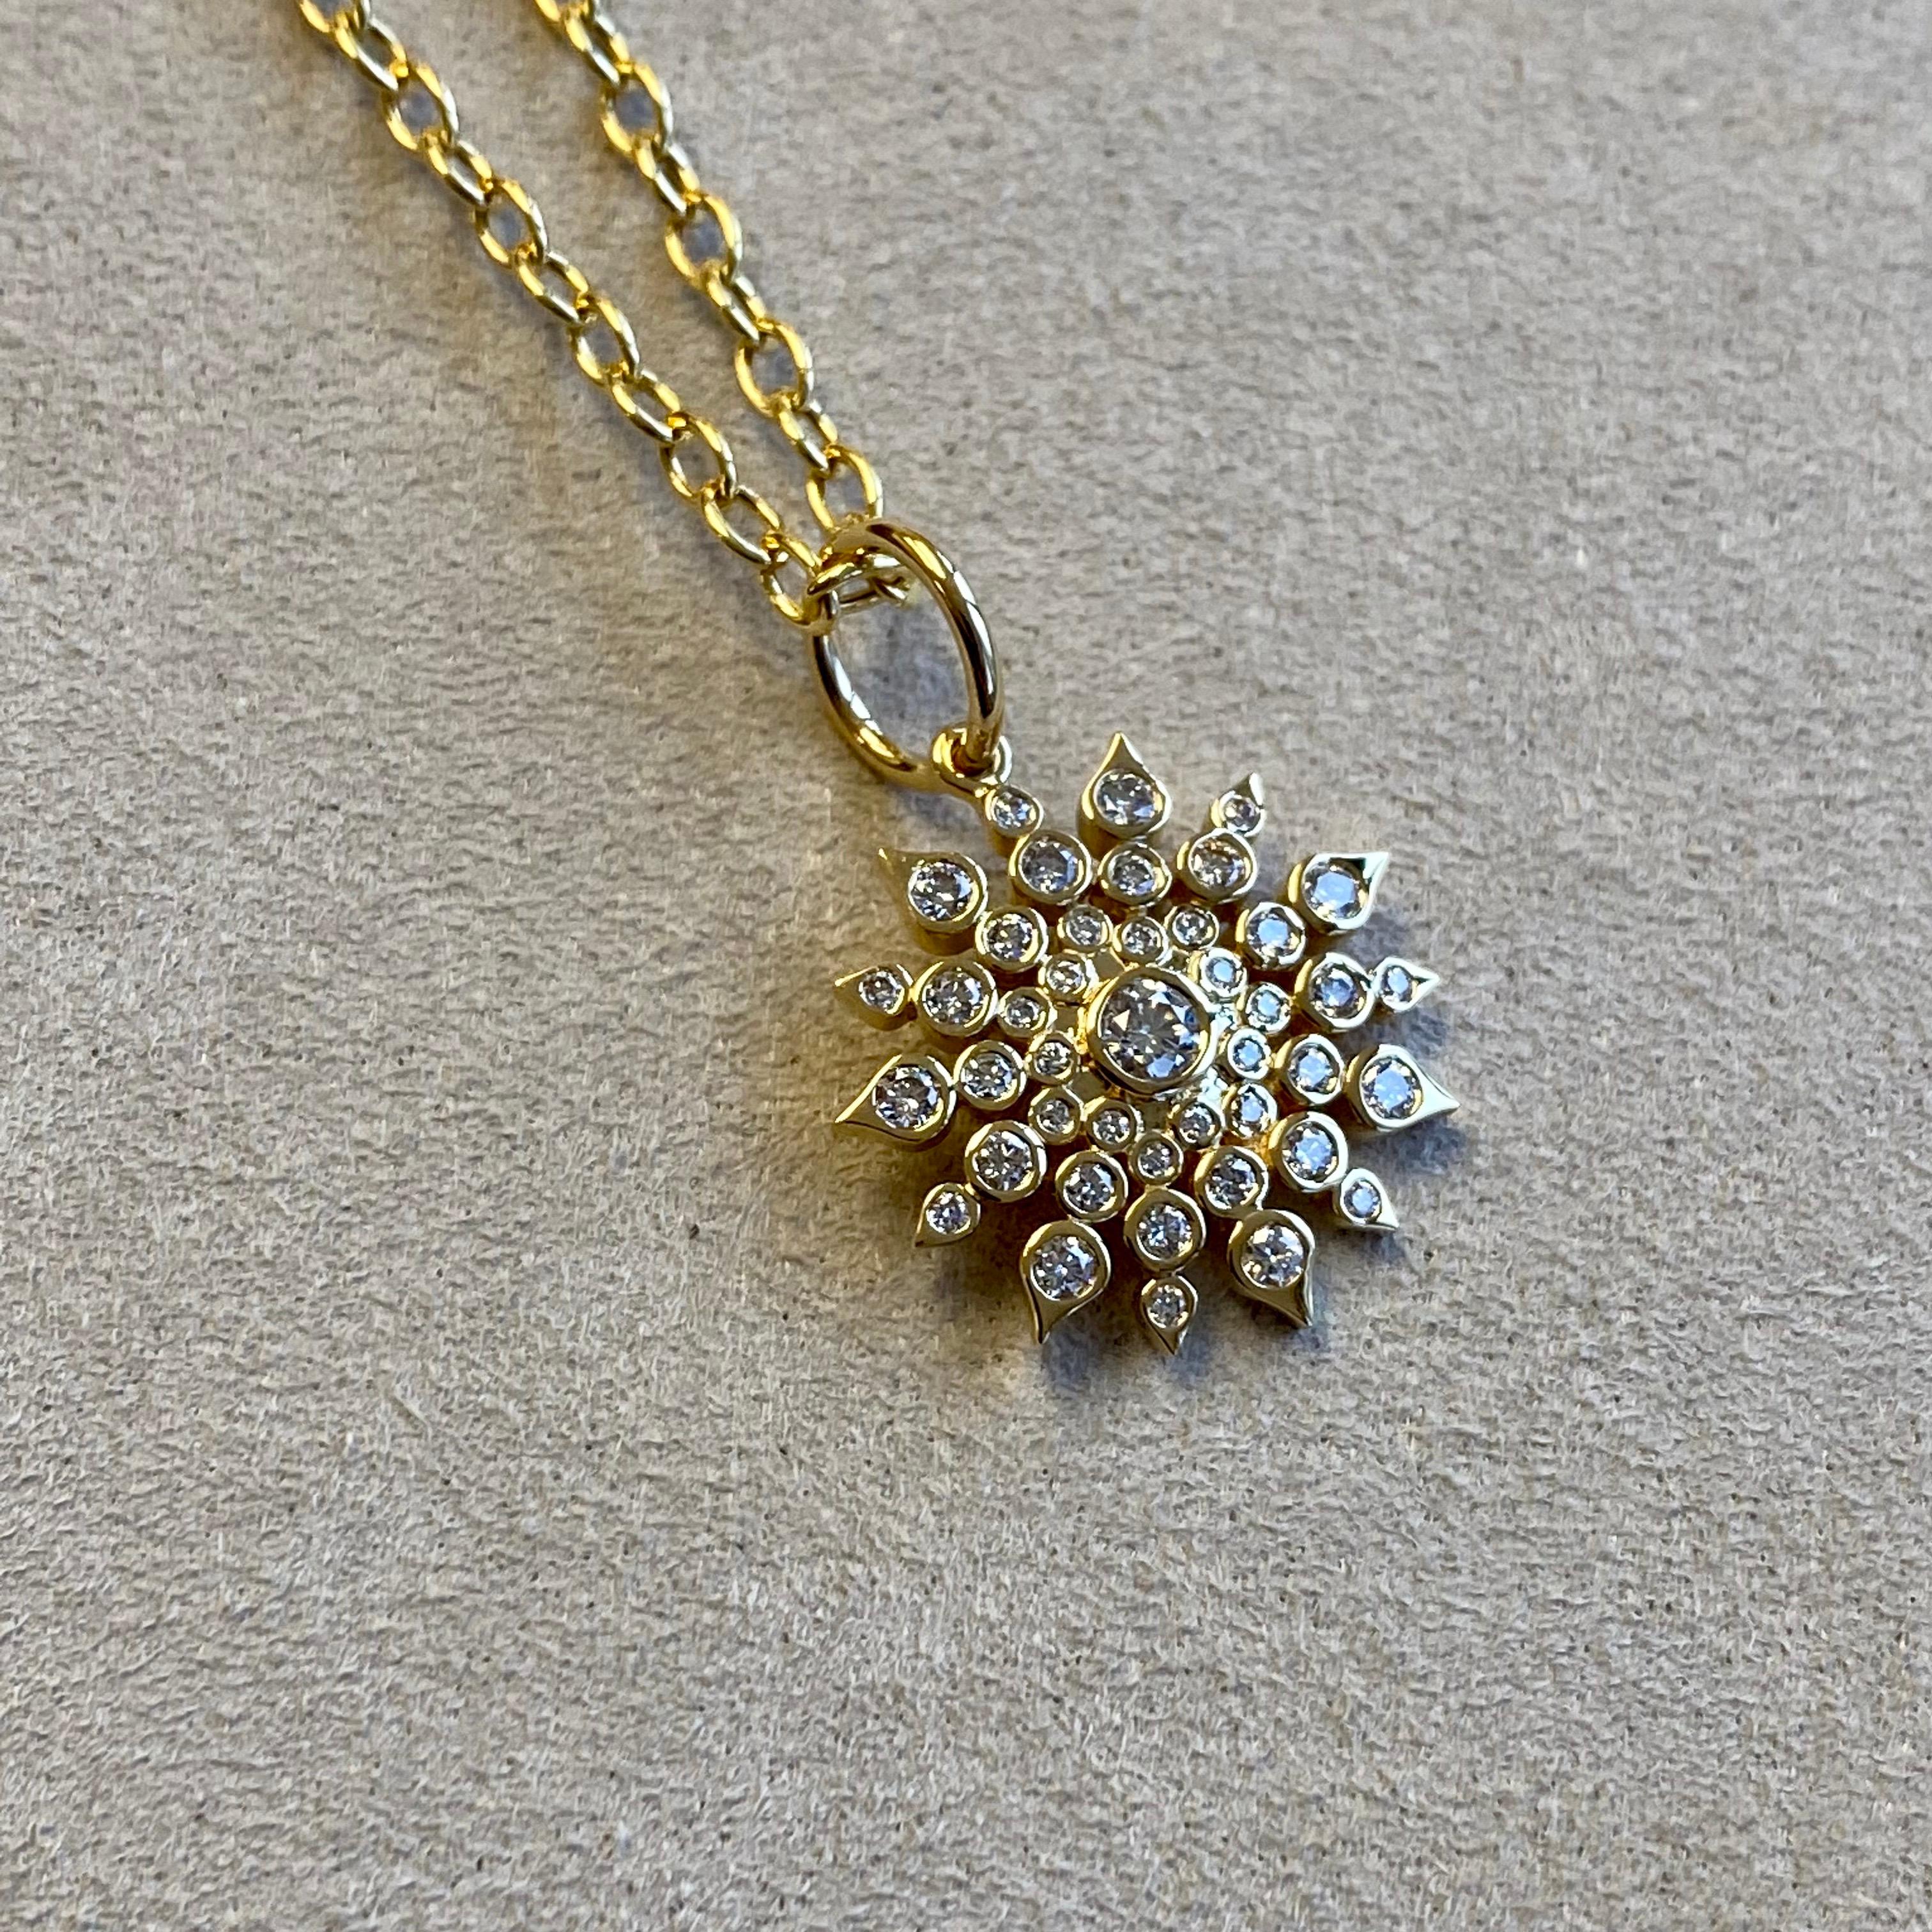 Round Cut Syna Yellow Gold Cosmic Starburst Pendant with Diamonds For Sale